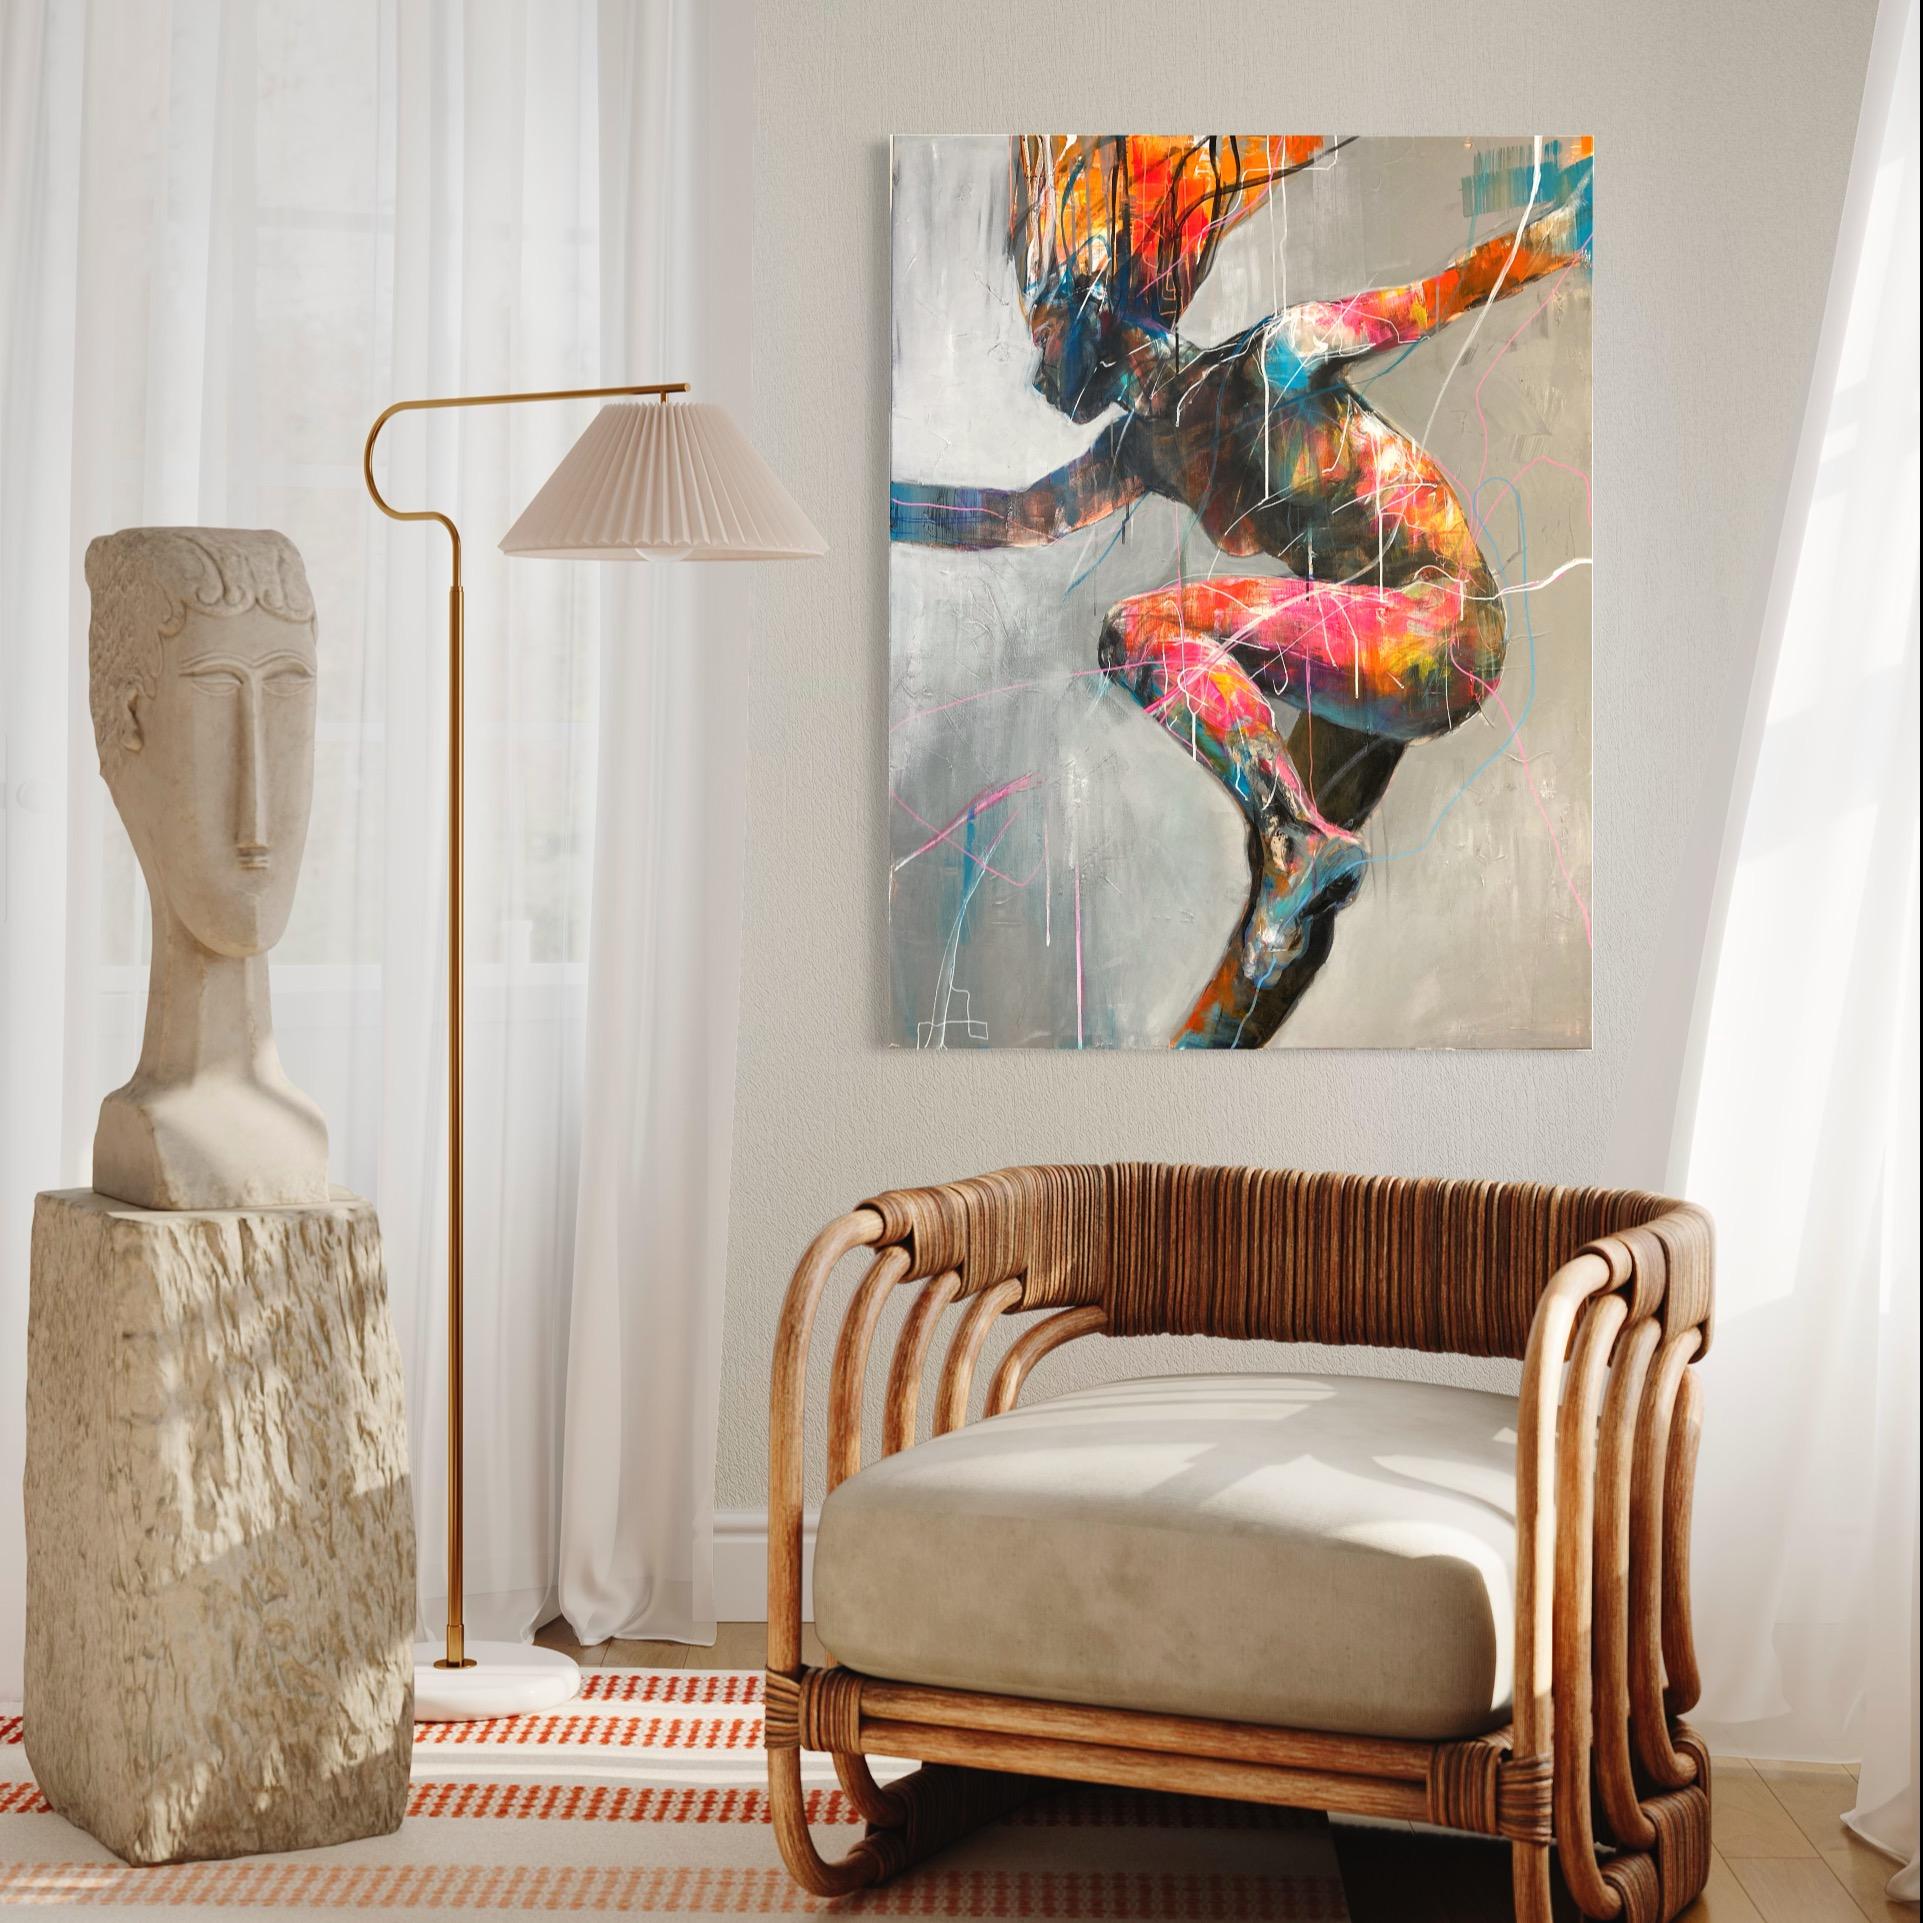 This vertical, figurative acrylic painting measures 45.5 inches high and 35 inches wide. It is wired and ready to hang. It is hand signed by the artist on the front and back of the artwork. This piece would be an excellent addition to any